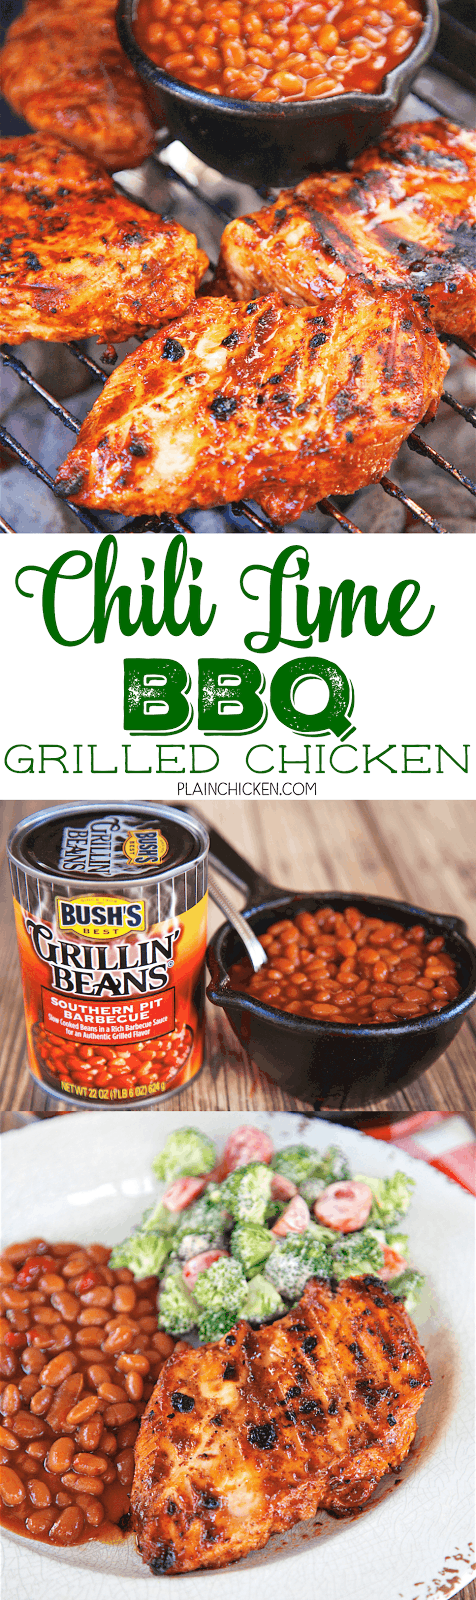 Chili Lime BBQ Grilled Chicken - only 5 ingredients in the marinade - olive oil, BBQ sauce, chili powder, lime juice and salt. Let the chicken marinate in the fridge for a few hours up to overnight. Throw some Bush's Grillin' Beans on the grill with the chicken and dinner is ready in about 15 minutes! SO good! Everyone cleaned their plates!! Making this again this weekend.